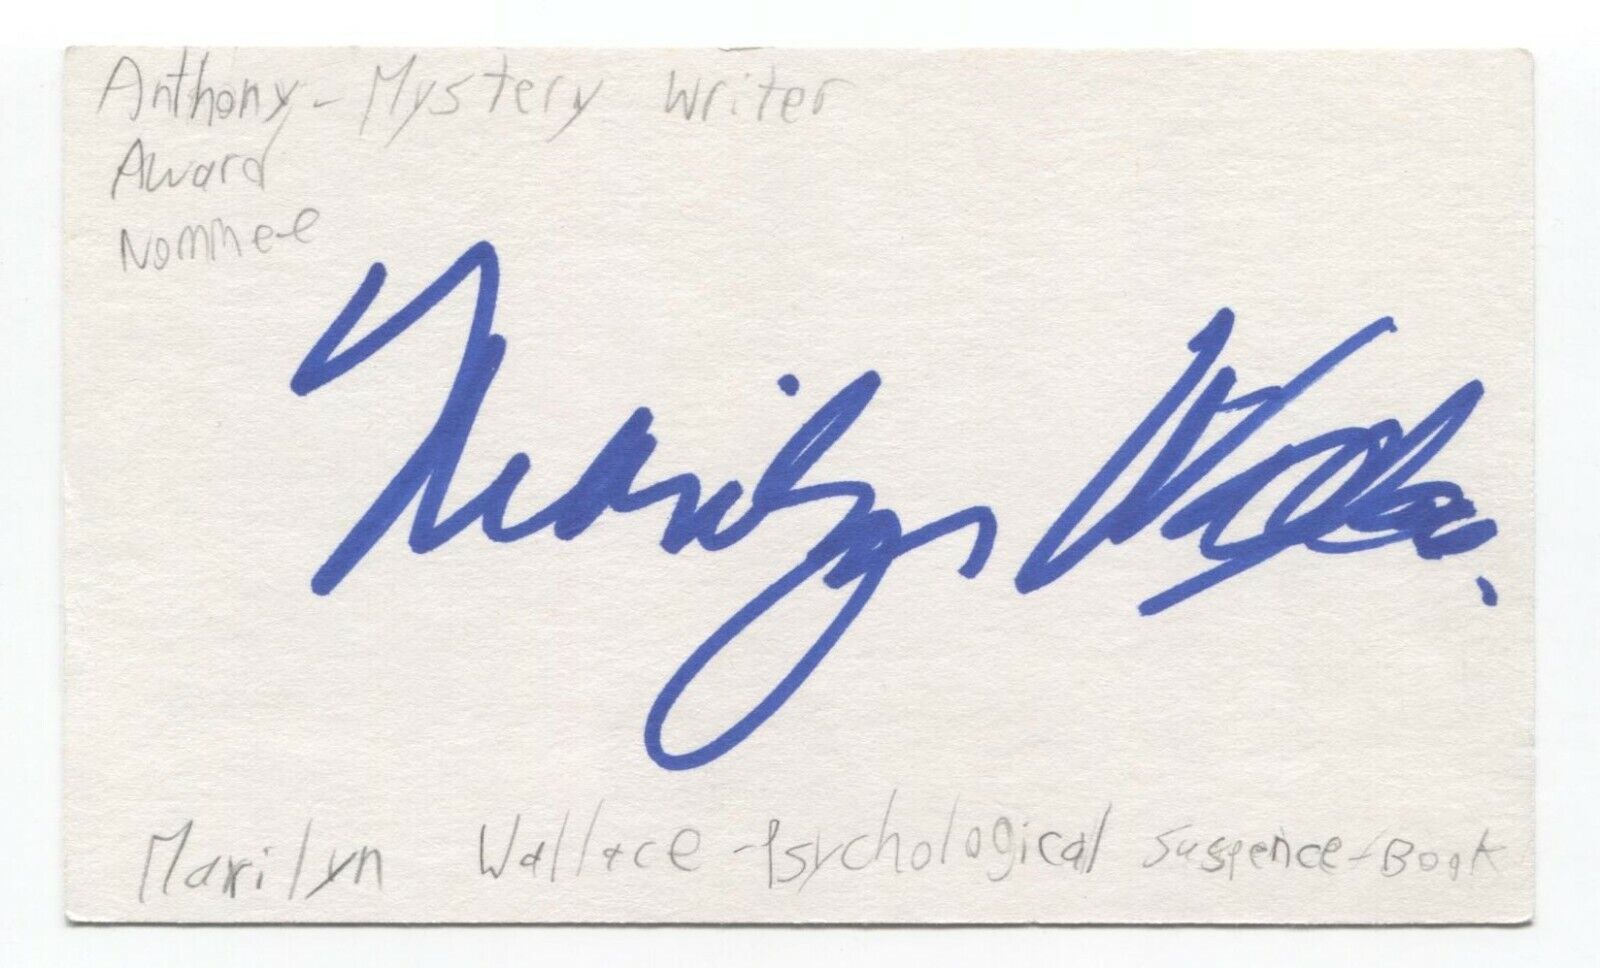 Marilyn Wallace Signed 3x5 Index Card Autographed Signature Author Novelist